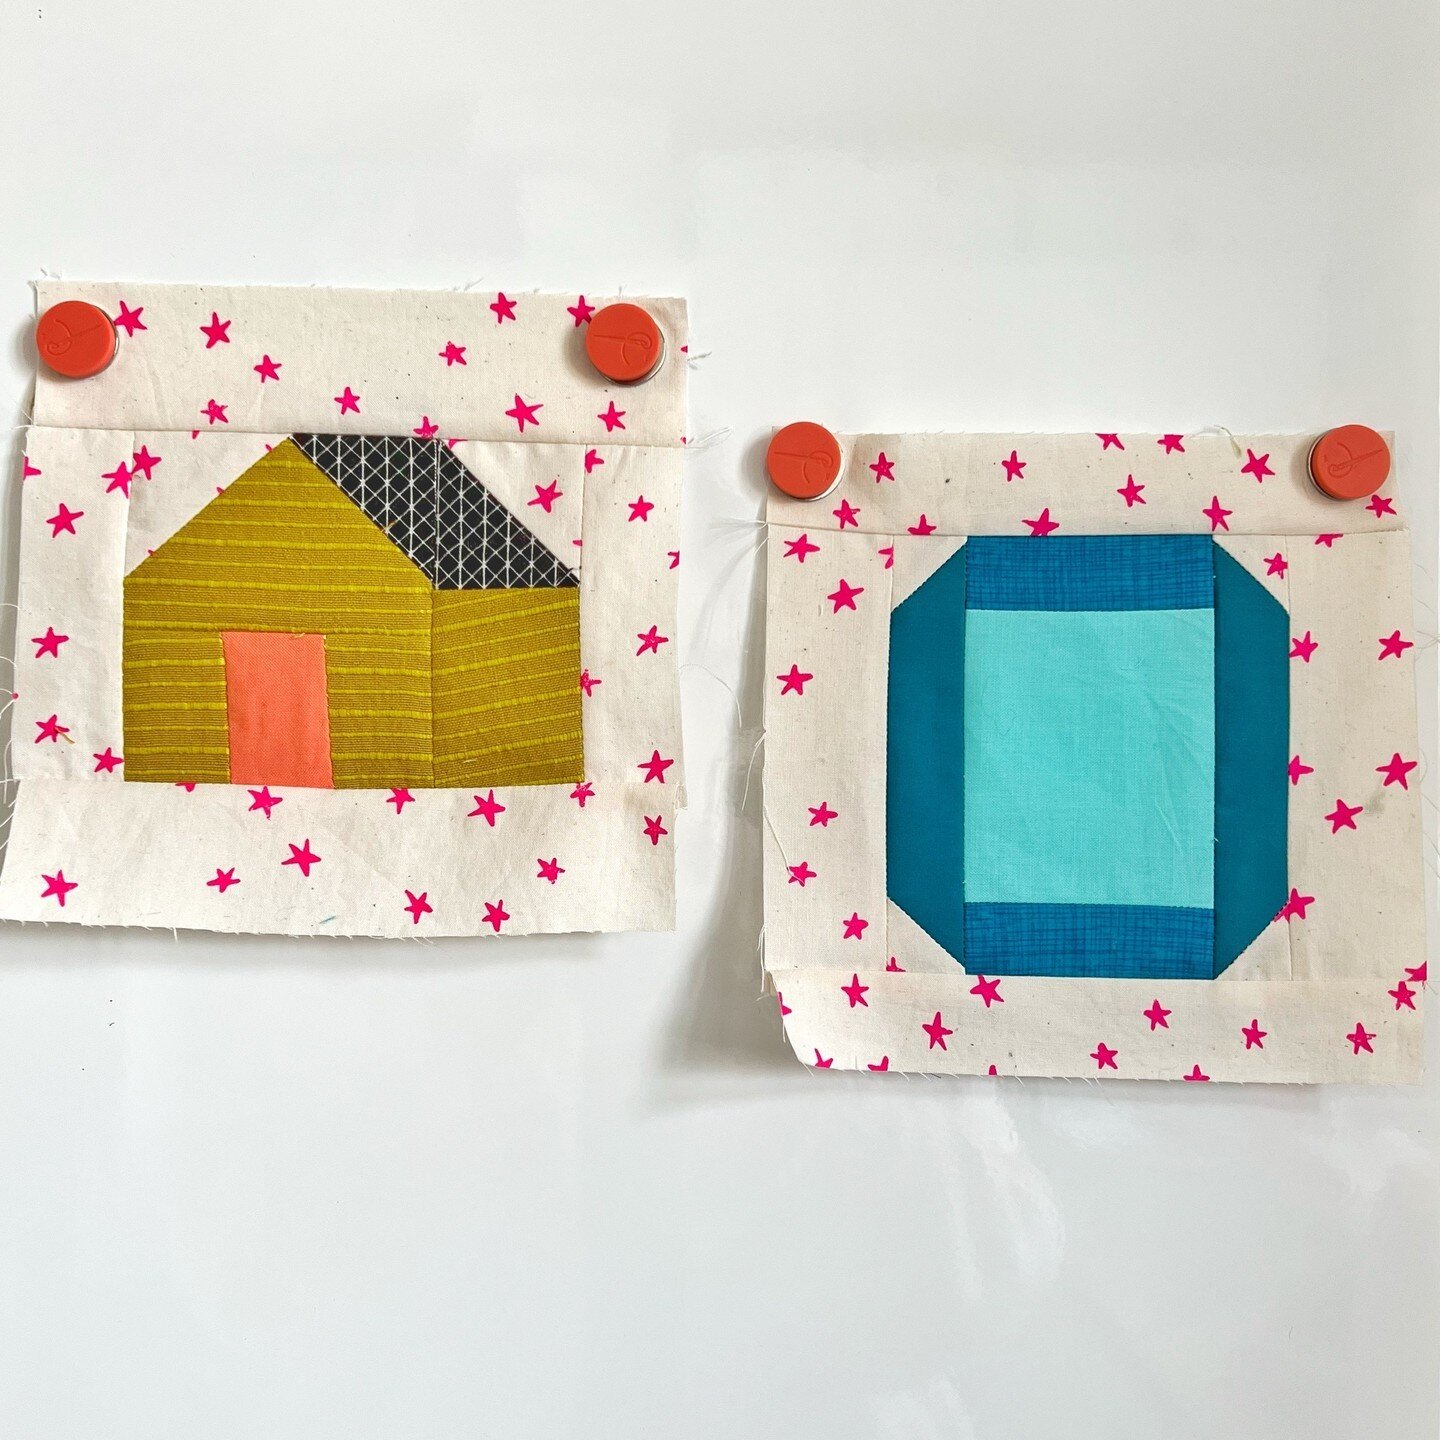 I had fun with the last 2 weeks blocks of the @arteastquiltingco&rsquo;s mini block sampler. 

I couldn&rsquo;t resist making a yellow house with a coral door. Using stripes let me play with perspective a bit. I don&rsquo;t think I nailed the perspec